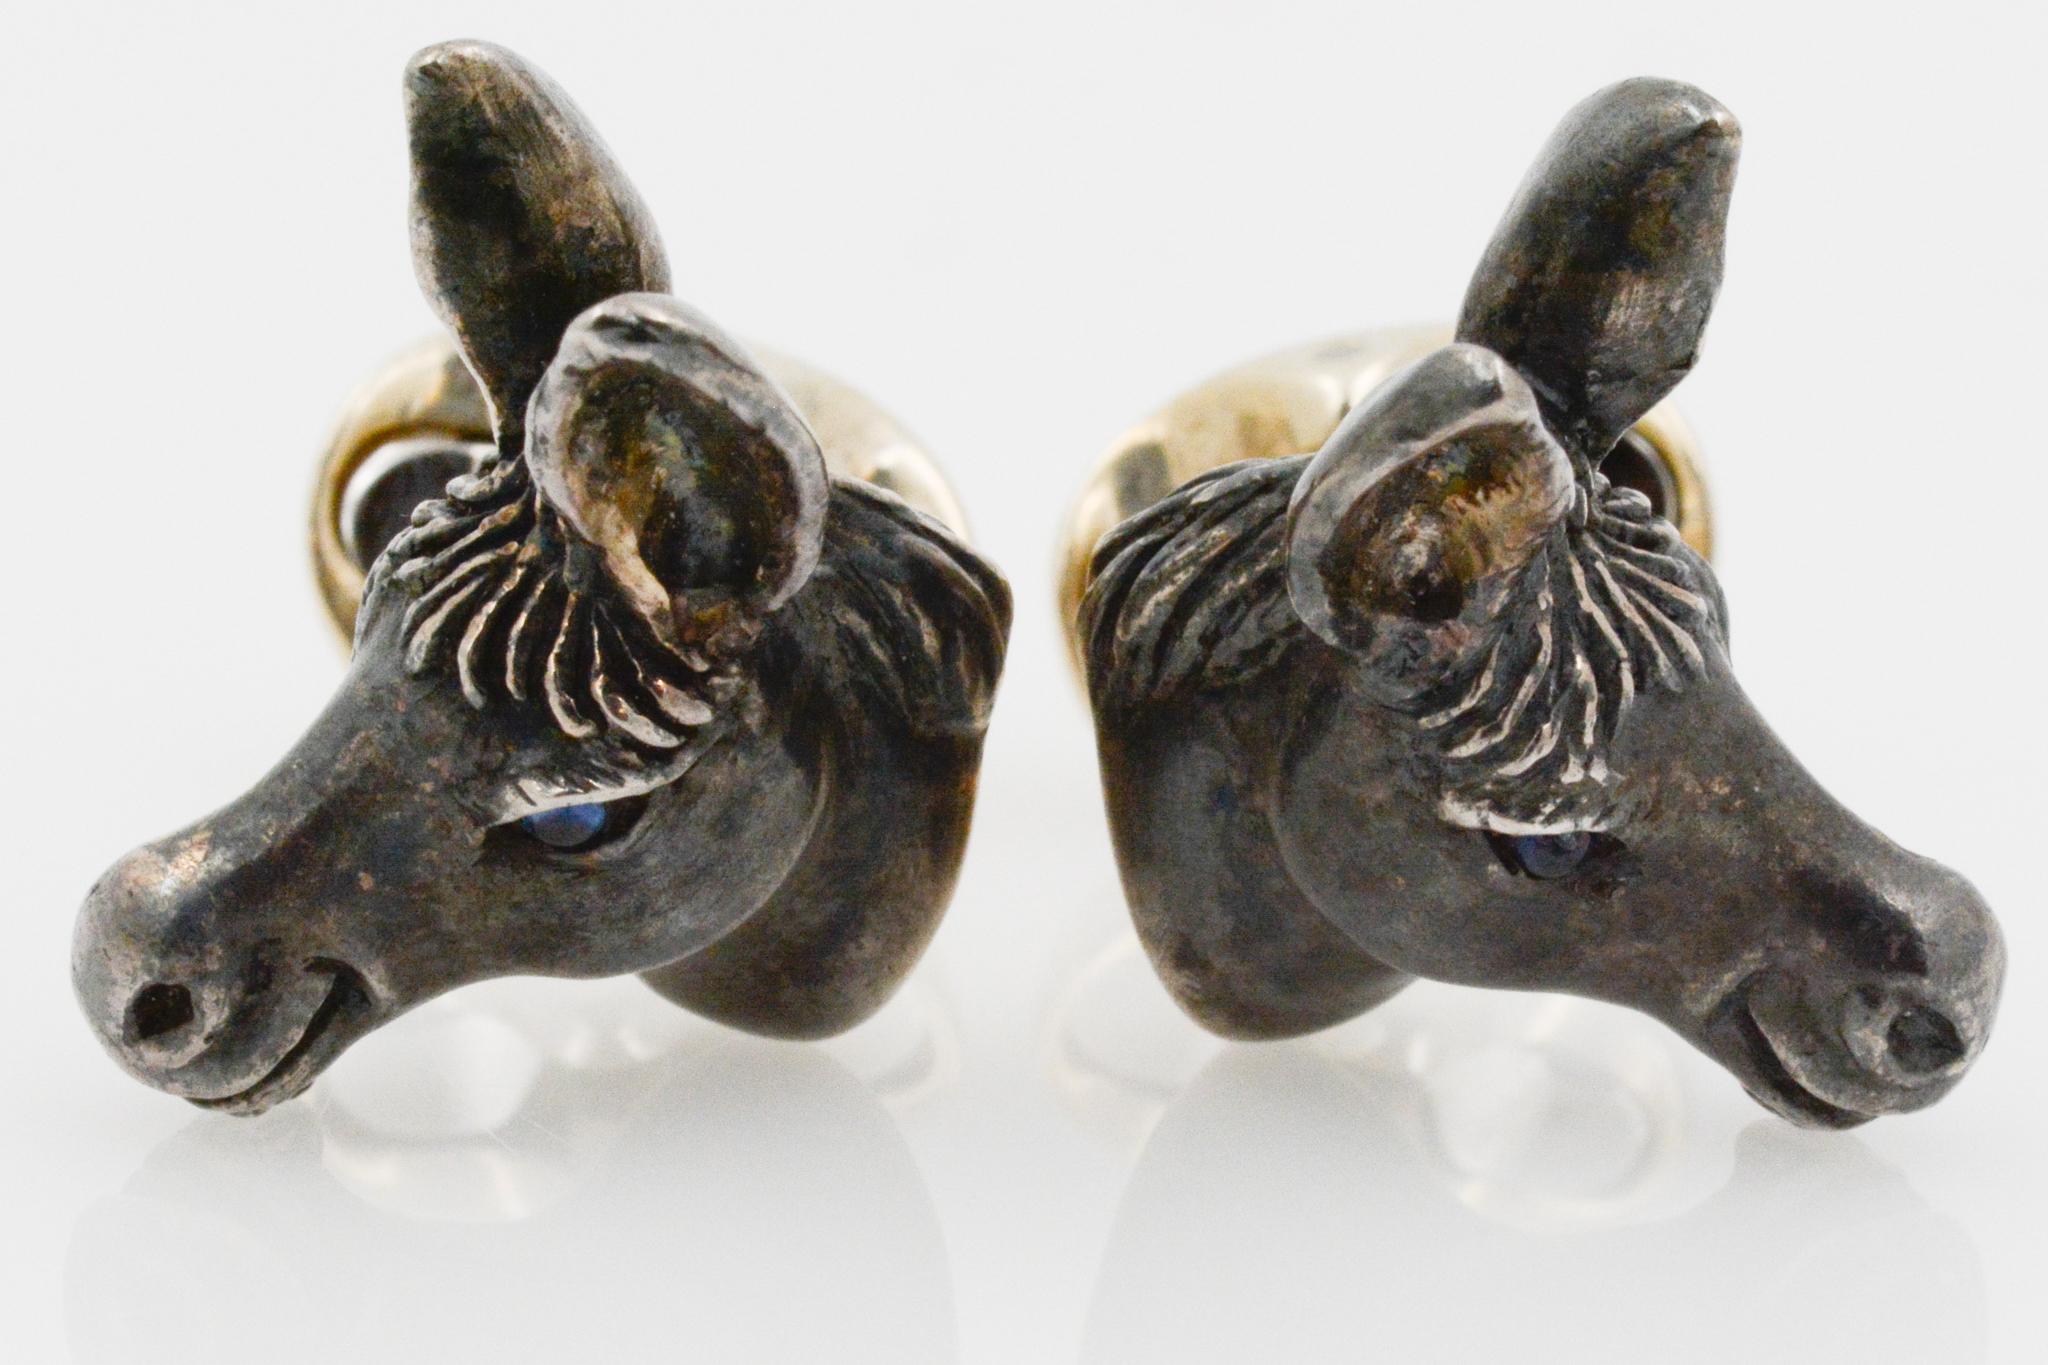 These sterling cufflinks have a lifelike donkey head design, with showcasing the intricate details of the ears, mane, and sapphire blue eyes. These cufflinks have oval backs. 

